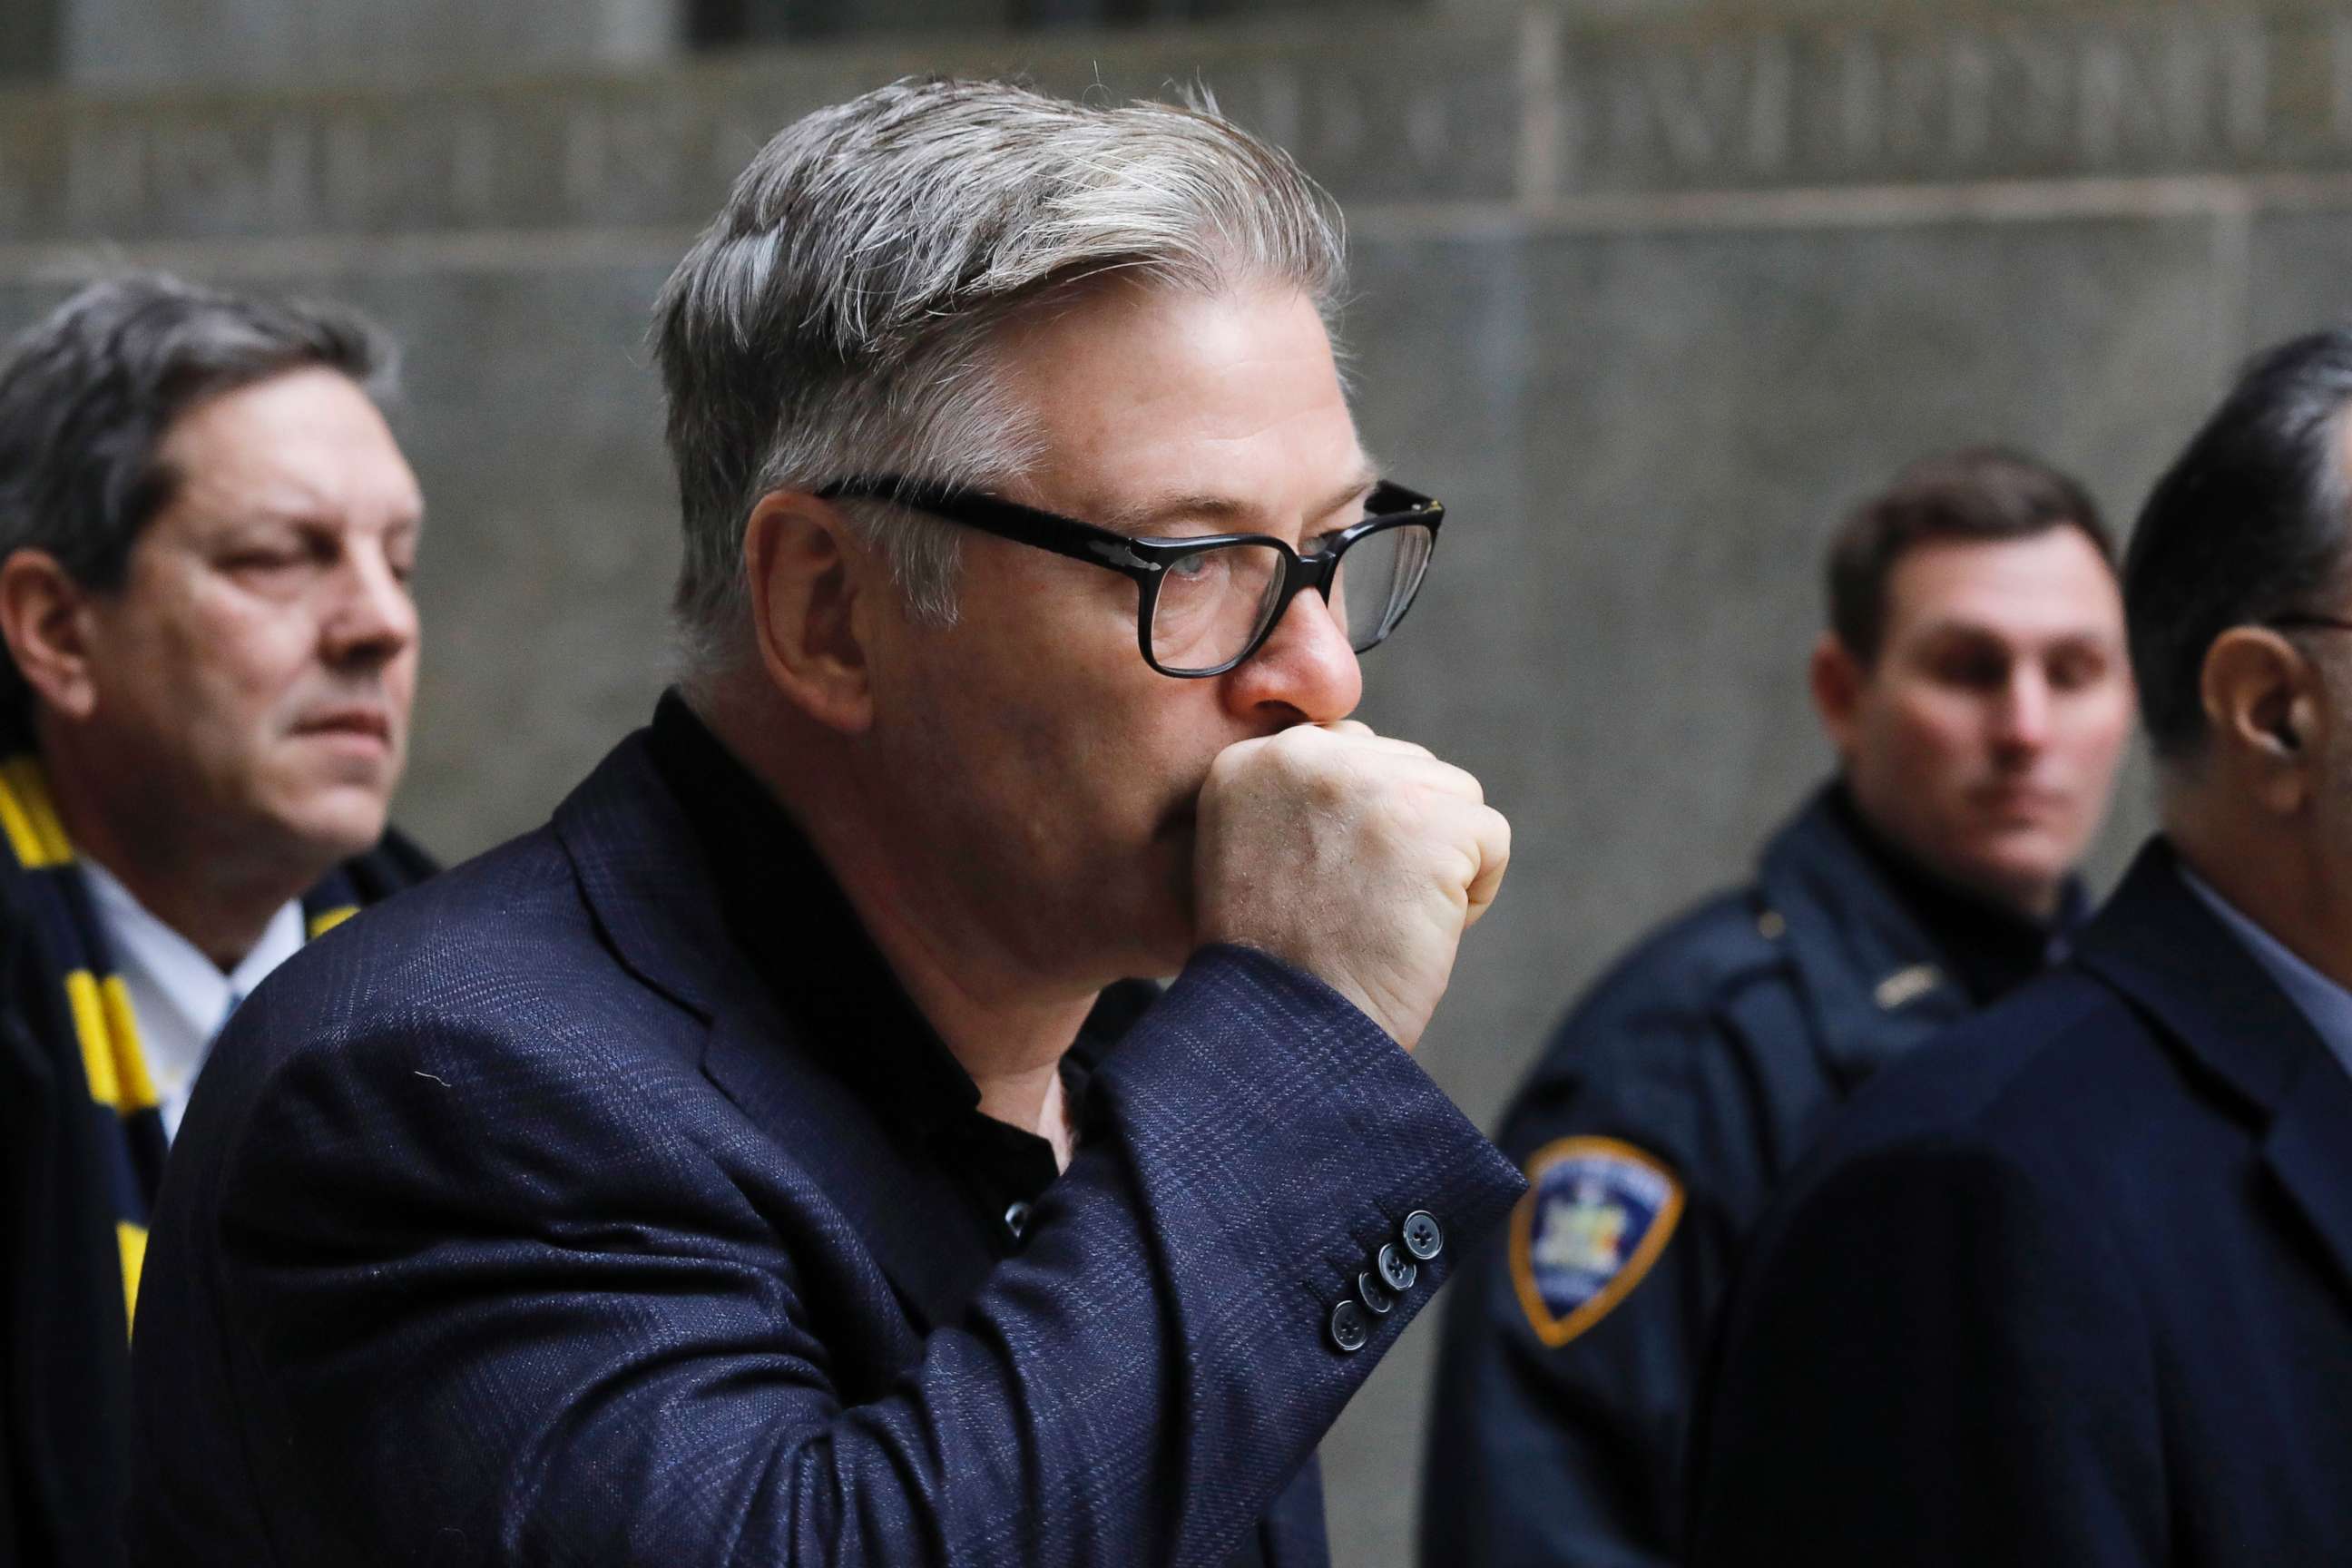 PHOTO: Actor Alec Baldwin leaves a New York City court, Jan. 23, 2019, after a hearing on charges that he slugged a man during a dispute over a parking spot last fall.